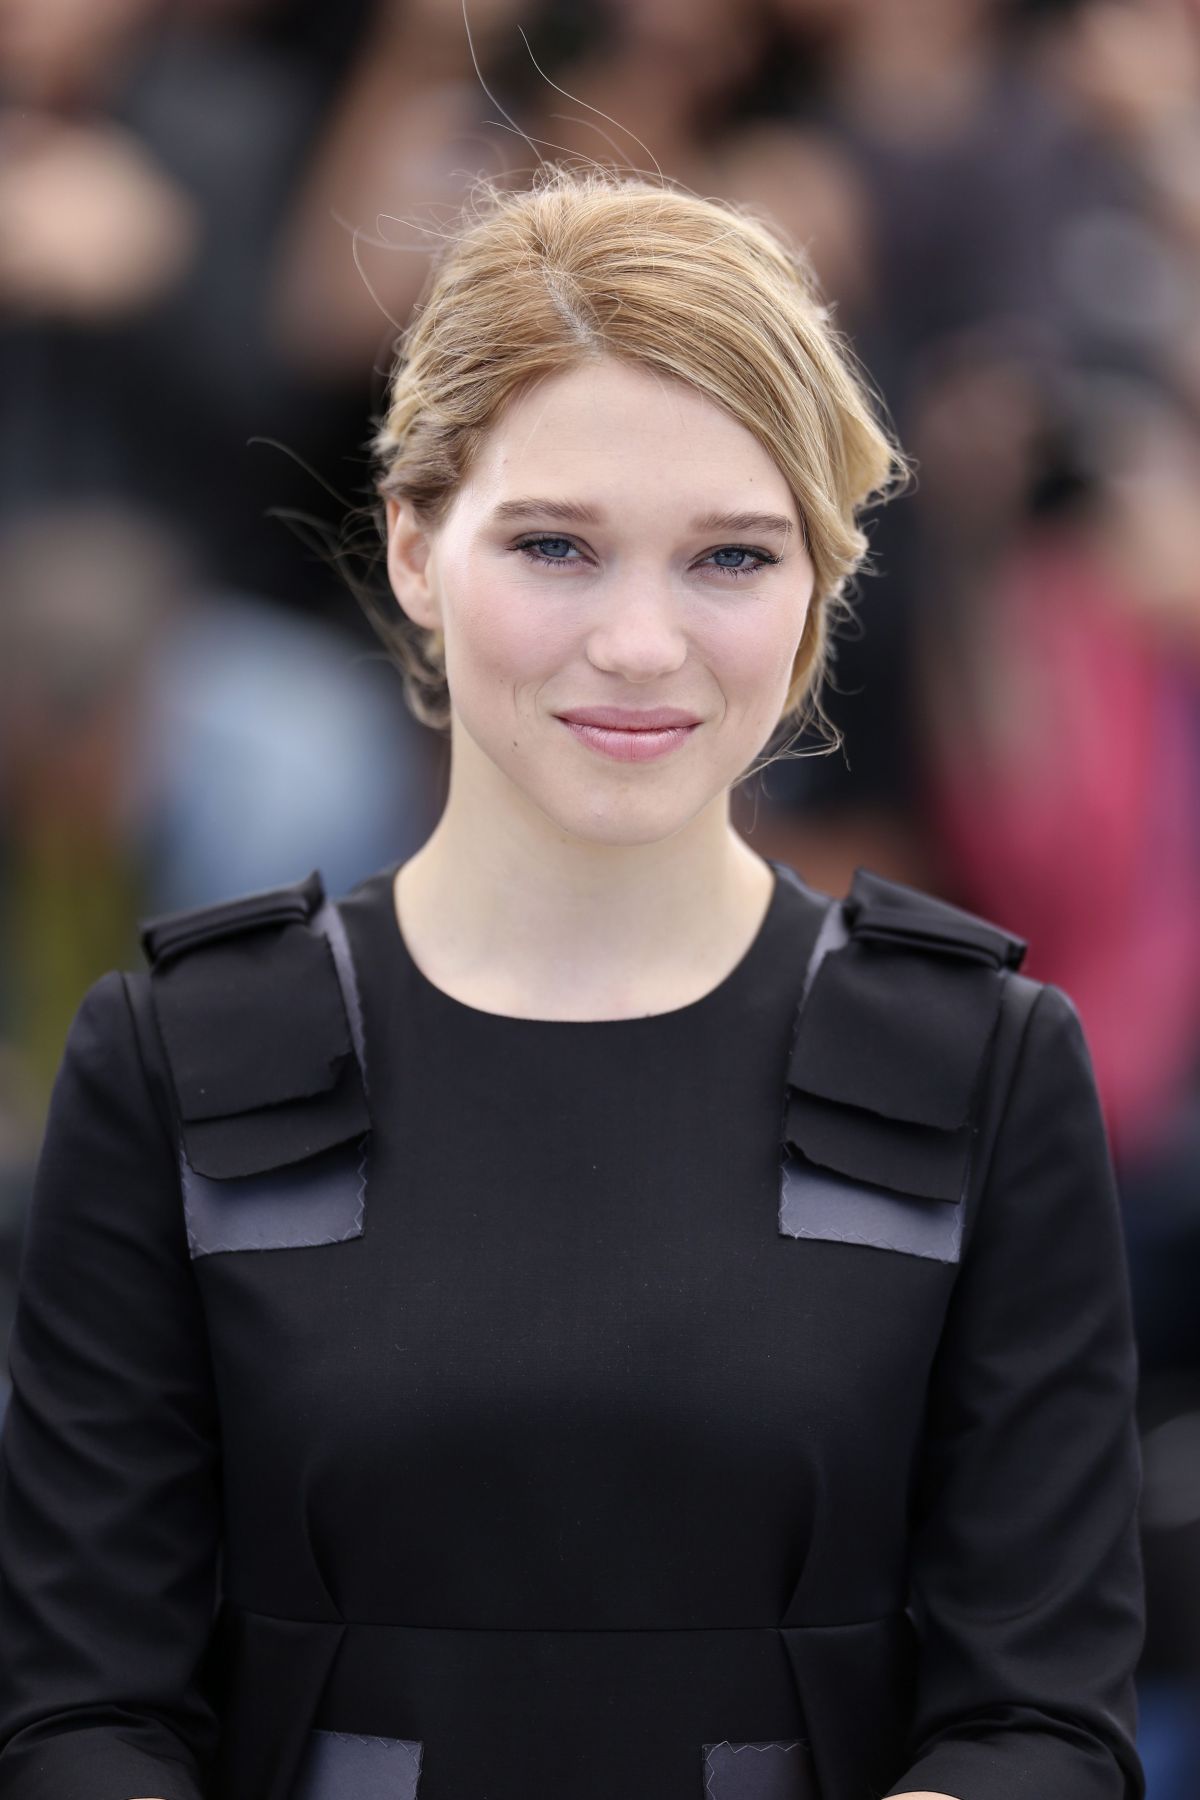 LEA SEYDOUX at The Lobster Photocall at Cannes Film Festival - HawtCelebs